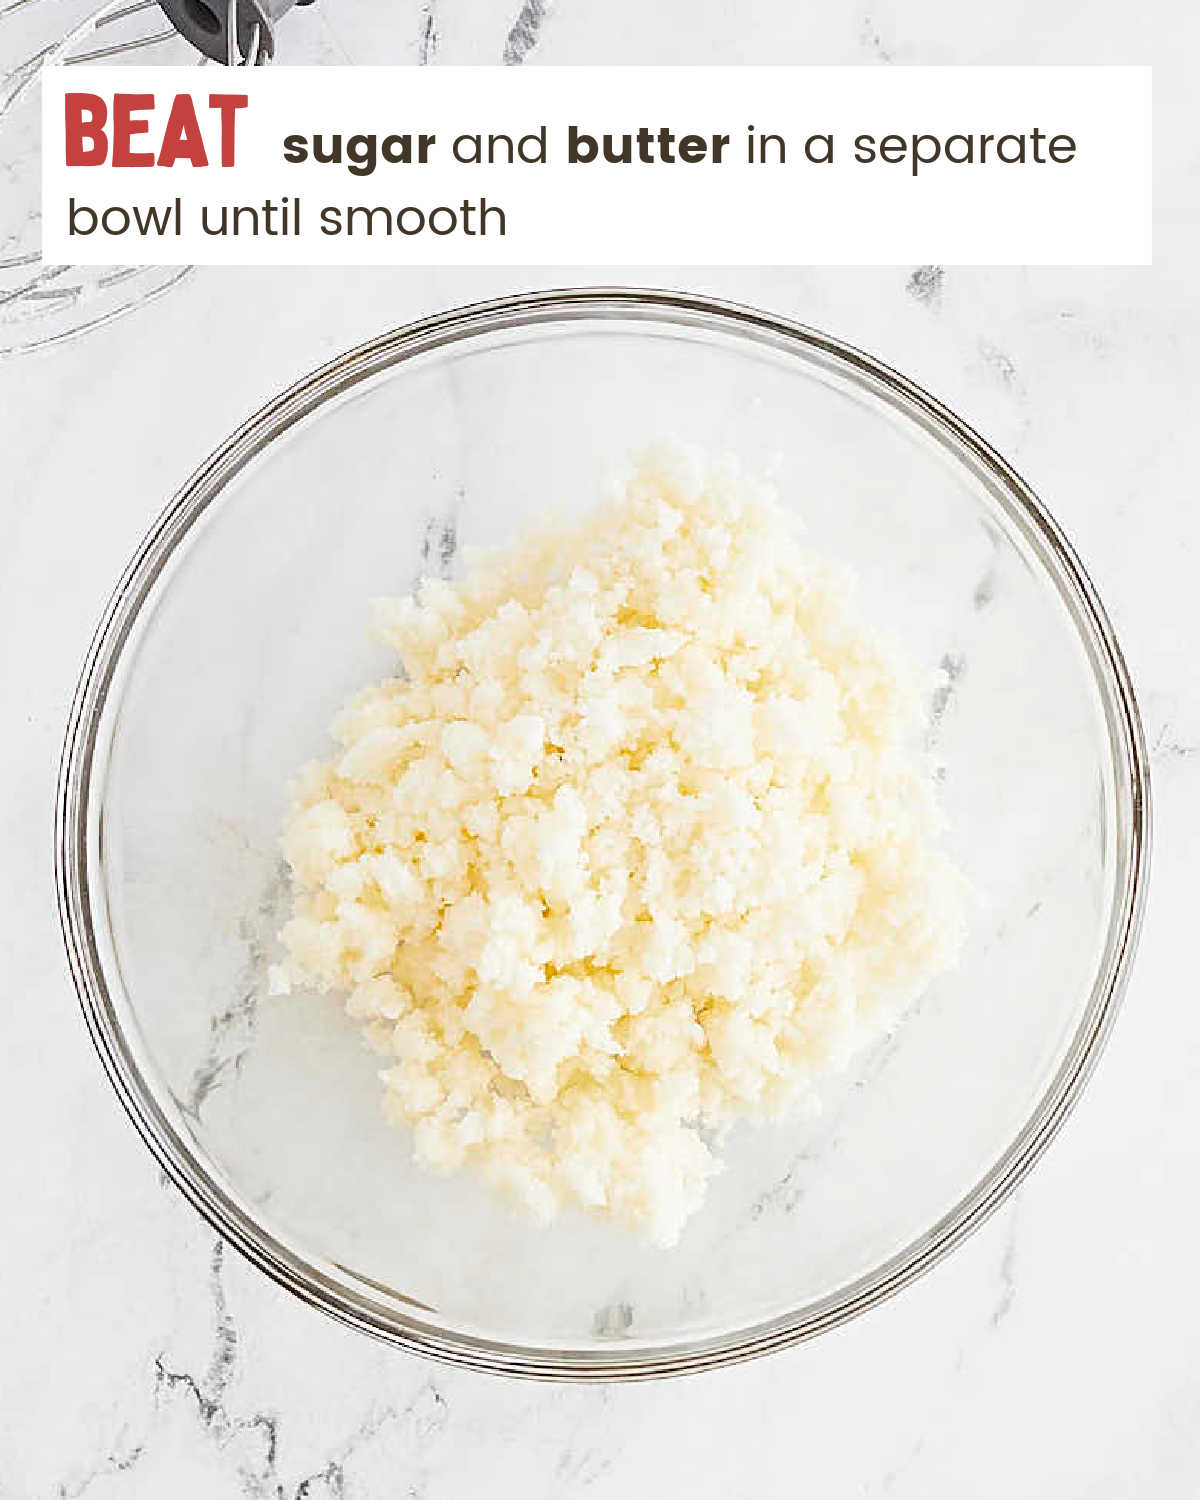 Cream sugar and butter in a separate bowl until smooth.